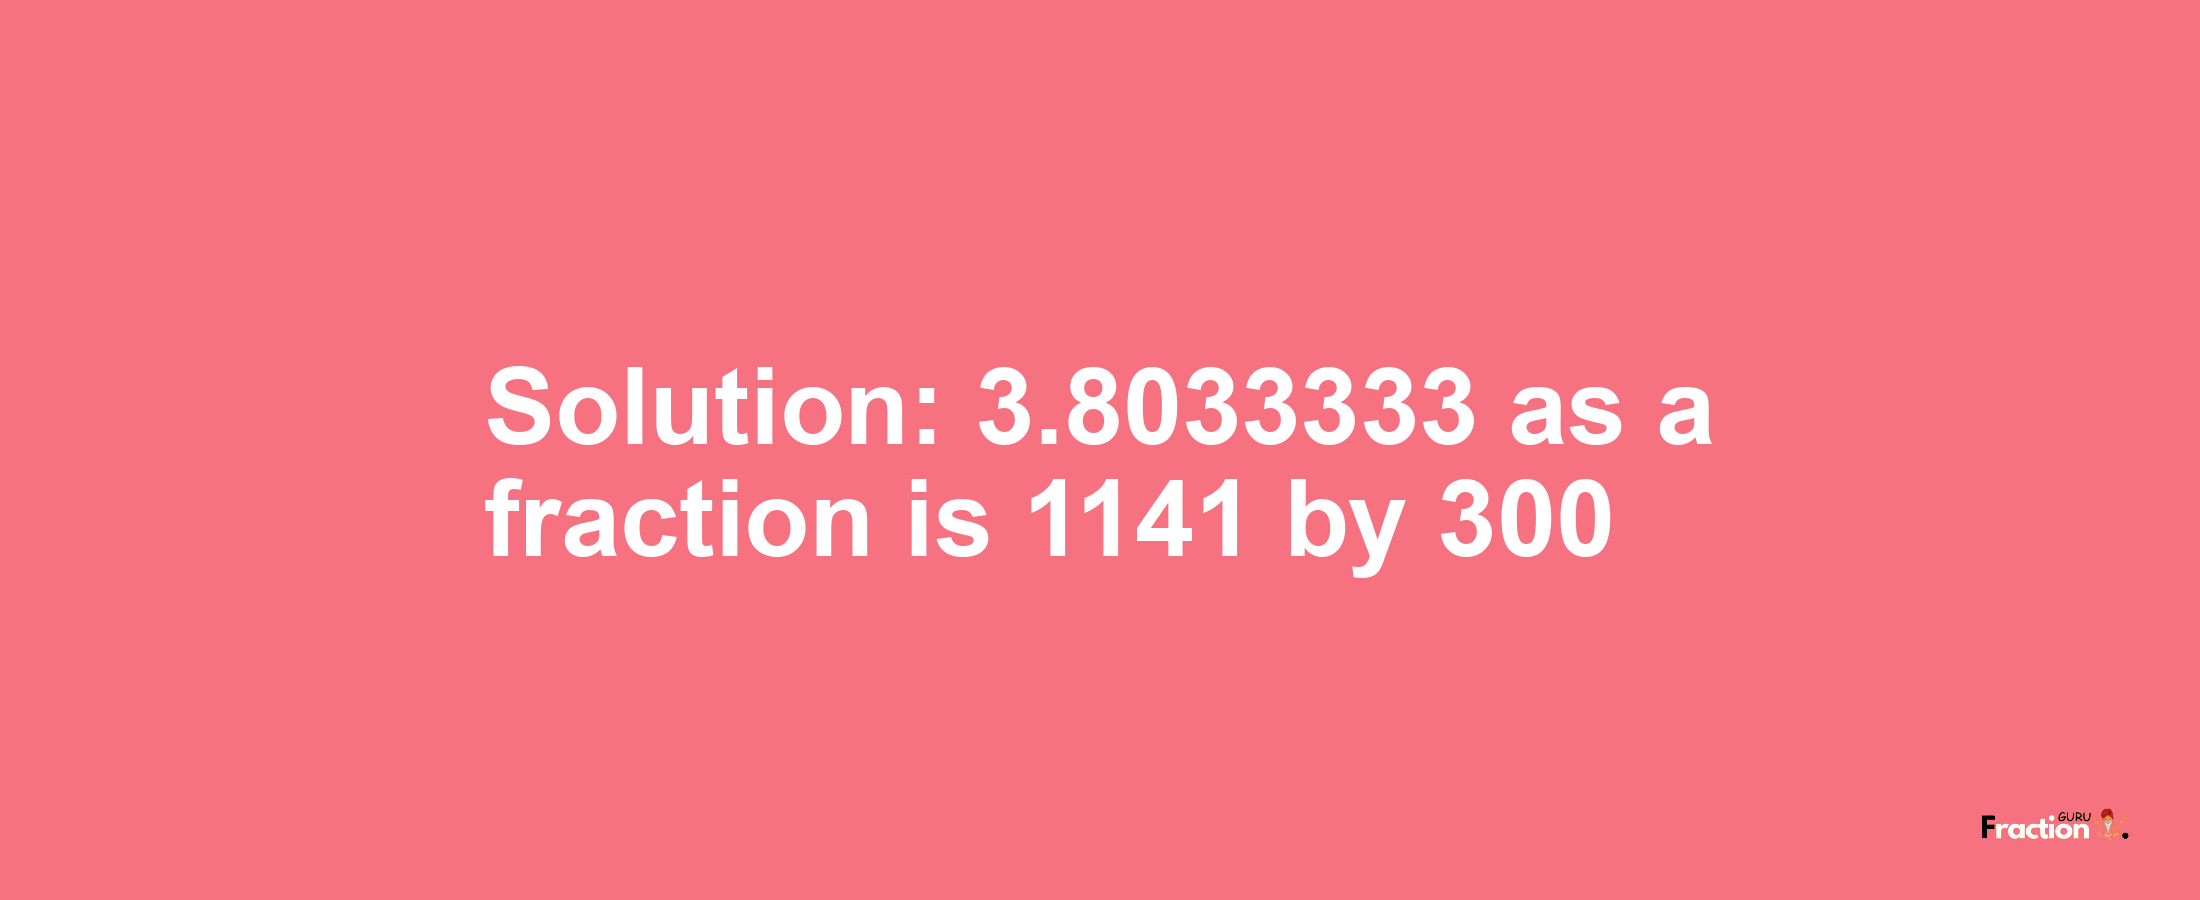 Solution:3.8033333 as a fraction is 1141/300